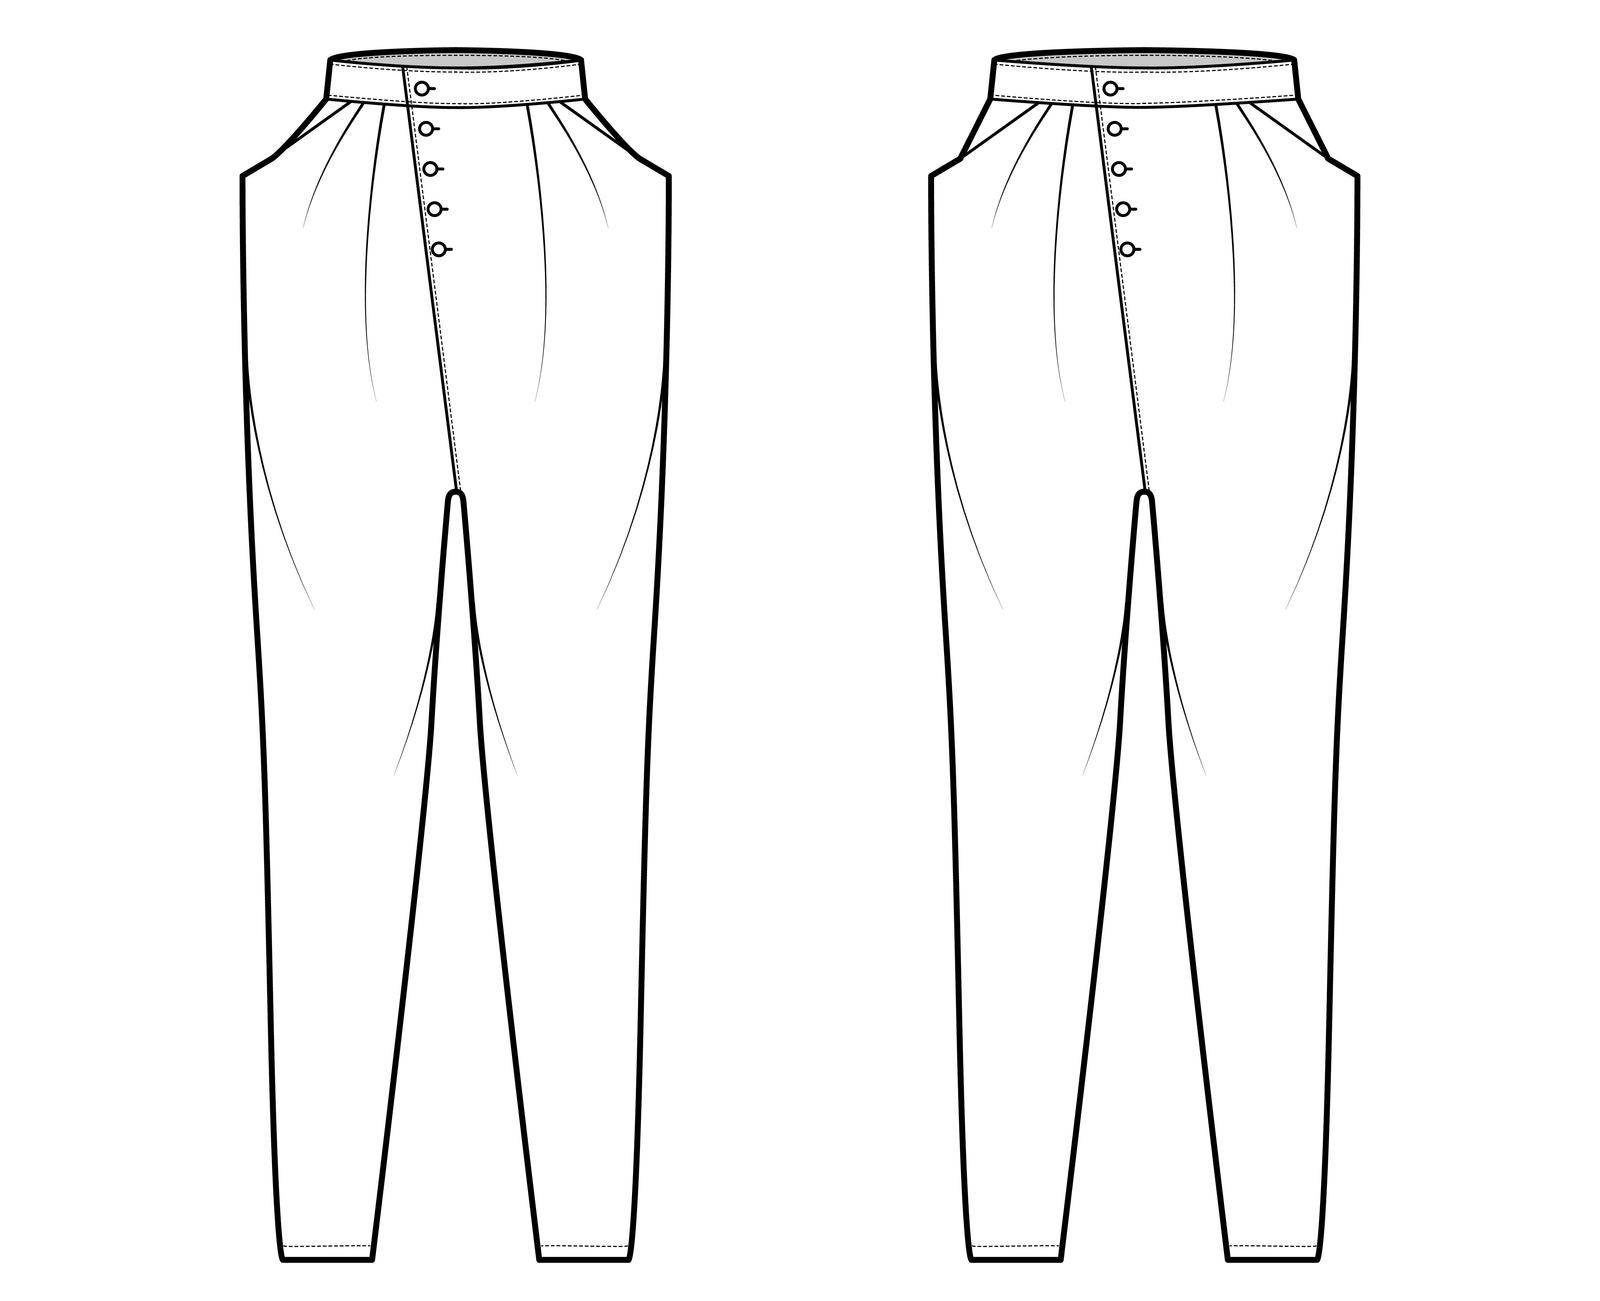 Set of Tapered Baggy pants technical fashion illustration with low normal waist, high rise, slash pockets, draping front. Flat apparel template, white color style. Women, men, unisex CAD mockup